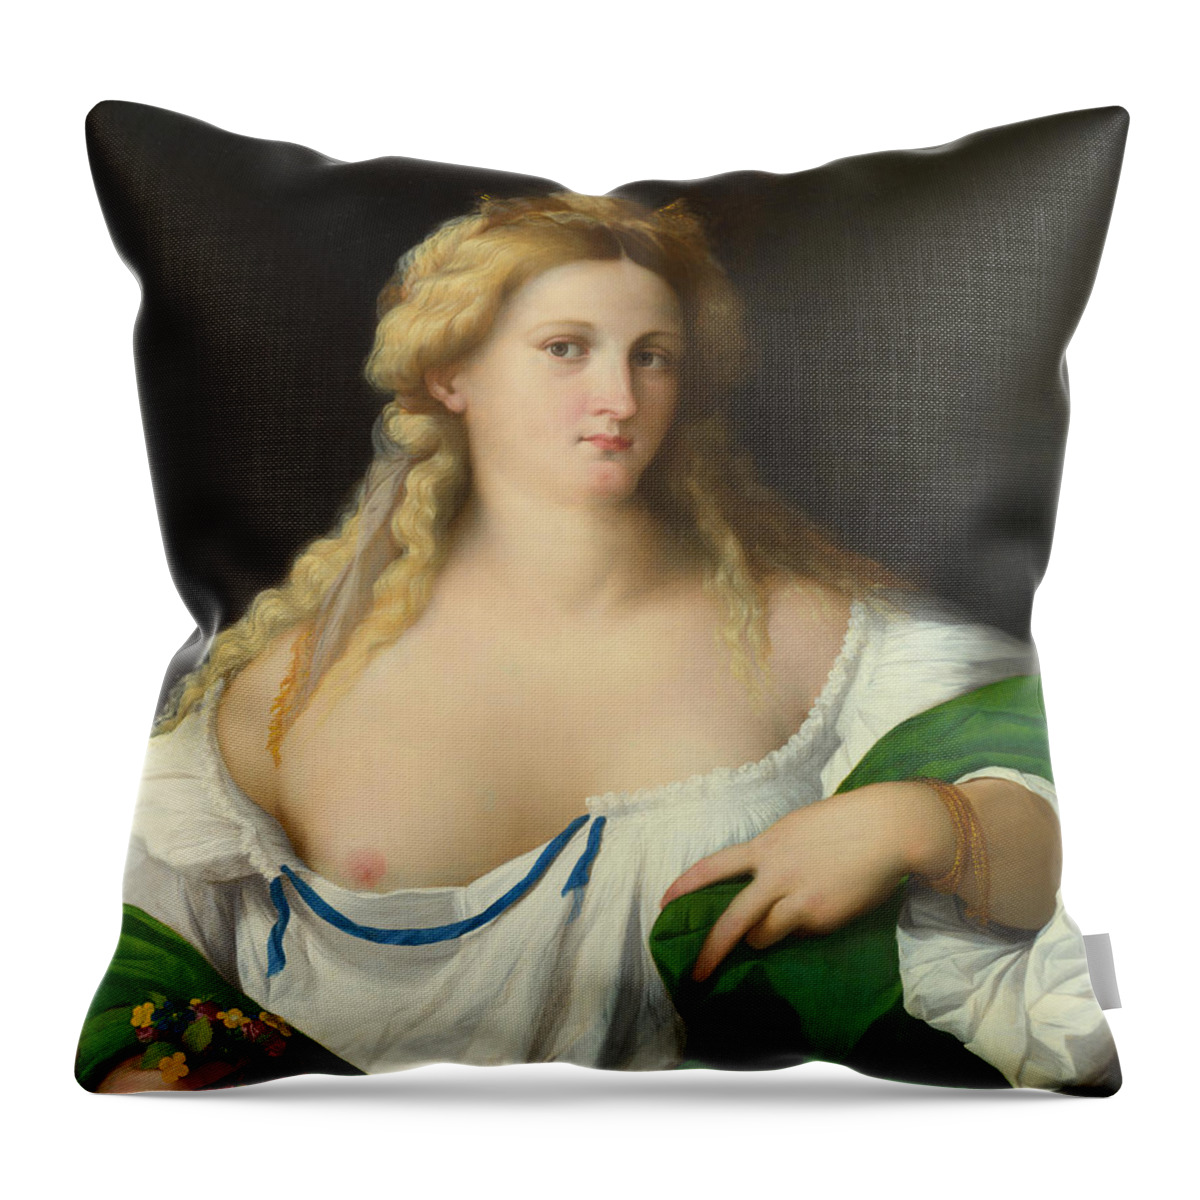 Palma Vecchio Throw Pillow featuring the painting A Blonde Woman by Palma Vecchio